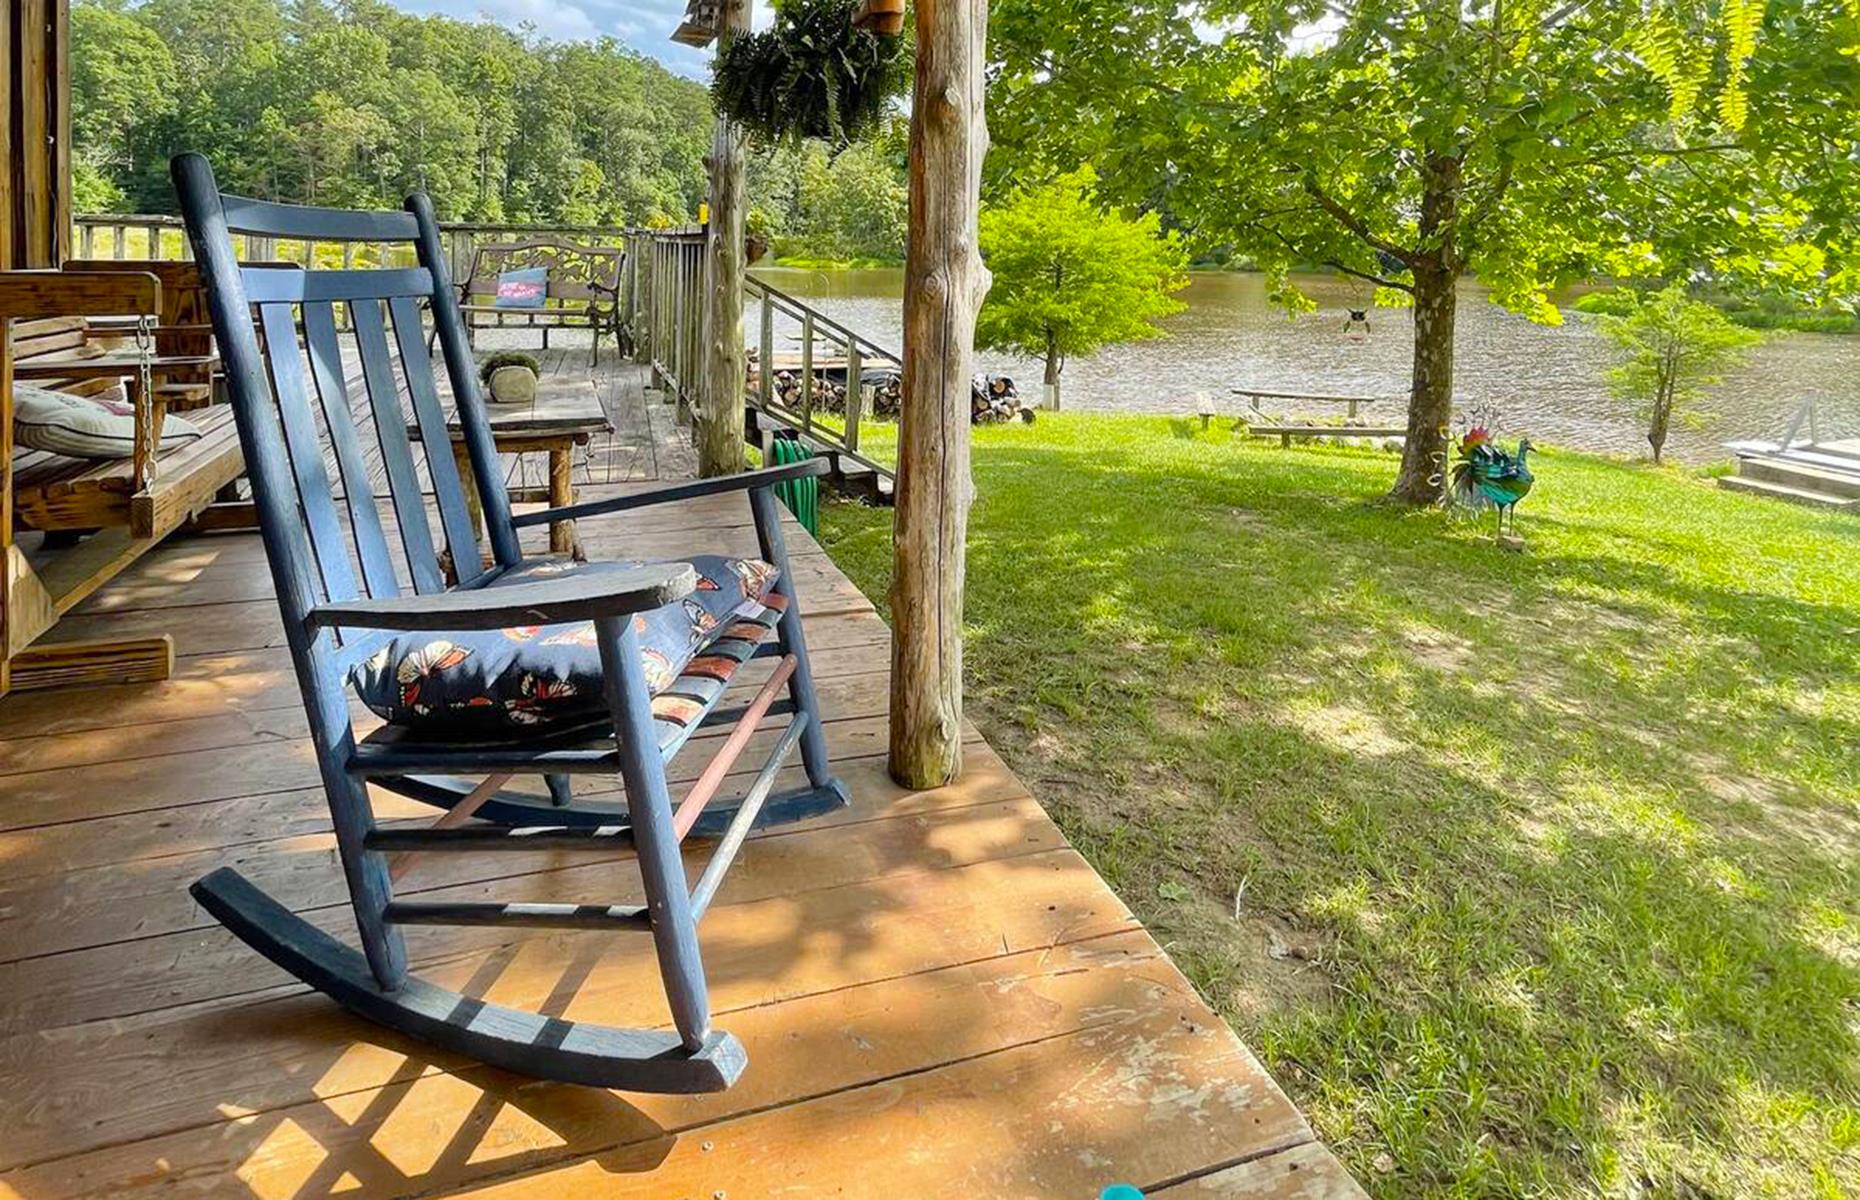 <p>Soak up some Southern scenery with <a href="https://www.airbnb.co.uk/rooms/20245881?adults=2&check_in=2023-02-20&source_impression_id=p3_1671554450_vKfZsNyi%2FPWqiuWv&guests=1&check_out=2023-02-25">this lakeside escape</a> in central Mississippi. There's room for five guests in the spacious wooden cabin, complete with a living room, kitchen, covered porches and a picnic table on the deck. You're also located right on a private lake, and you can take to the water on the pedal boat or kayak provided. Prices typically begin at $100 per night.</p>